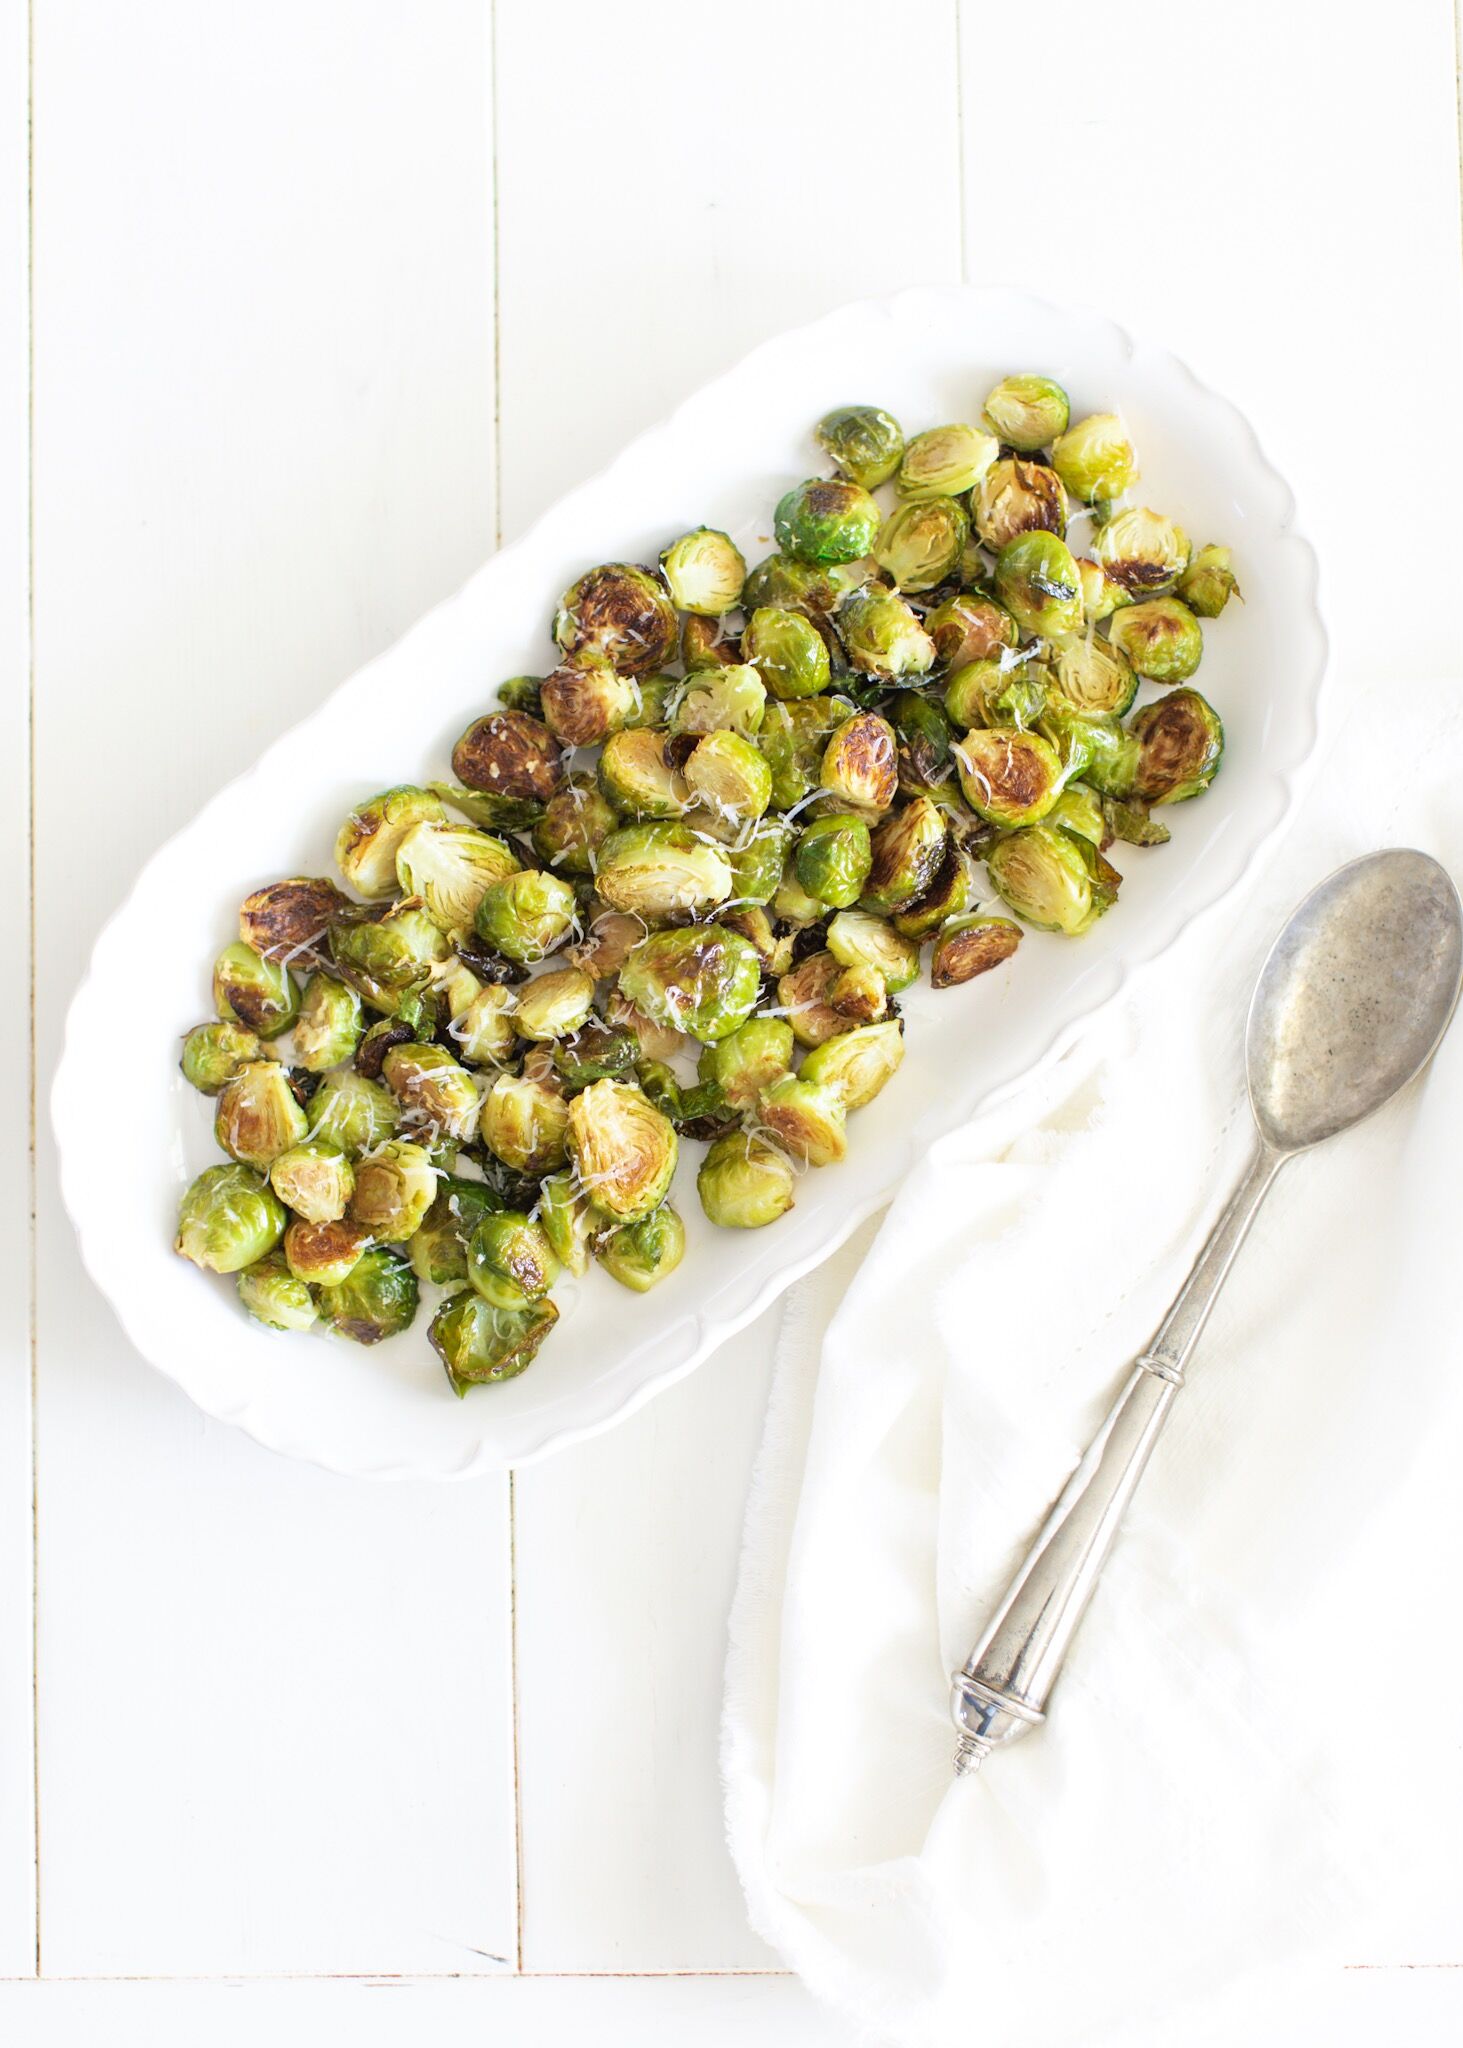 Parmesan Roasted Lemon Brussels Sprouts - an easy Thanksgiving side dish!